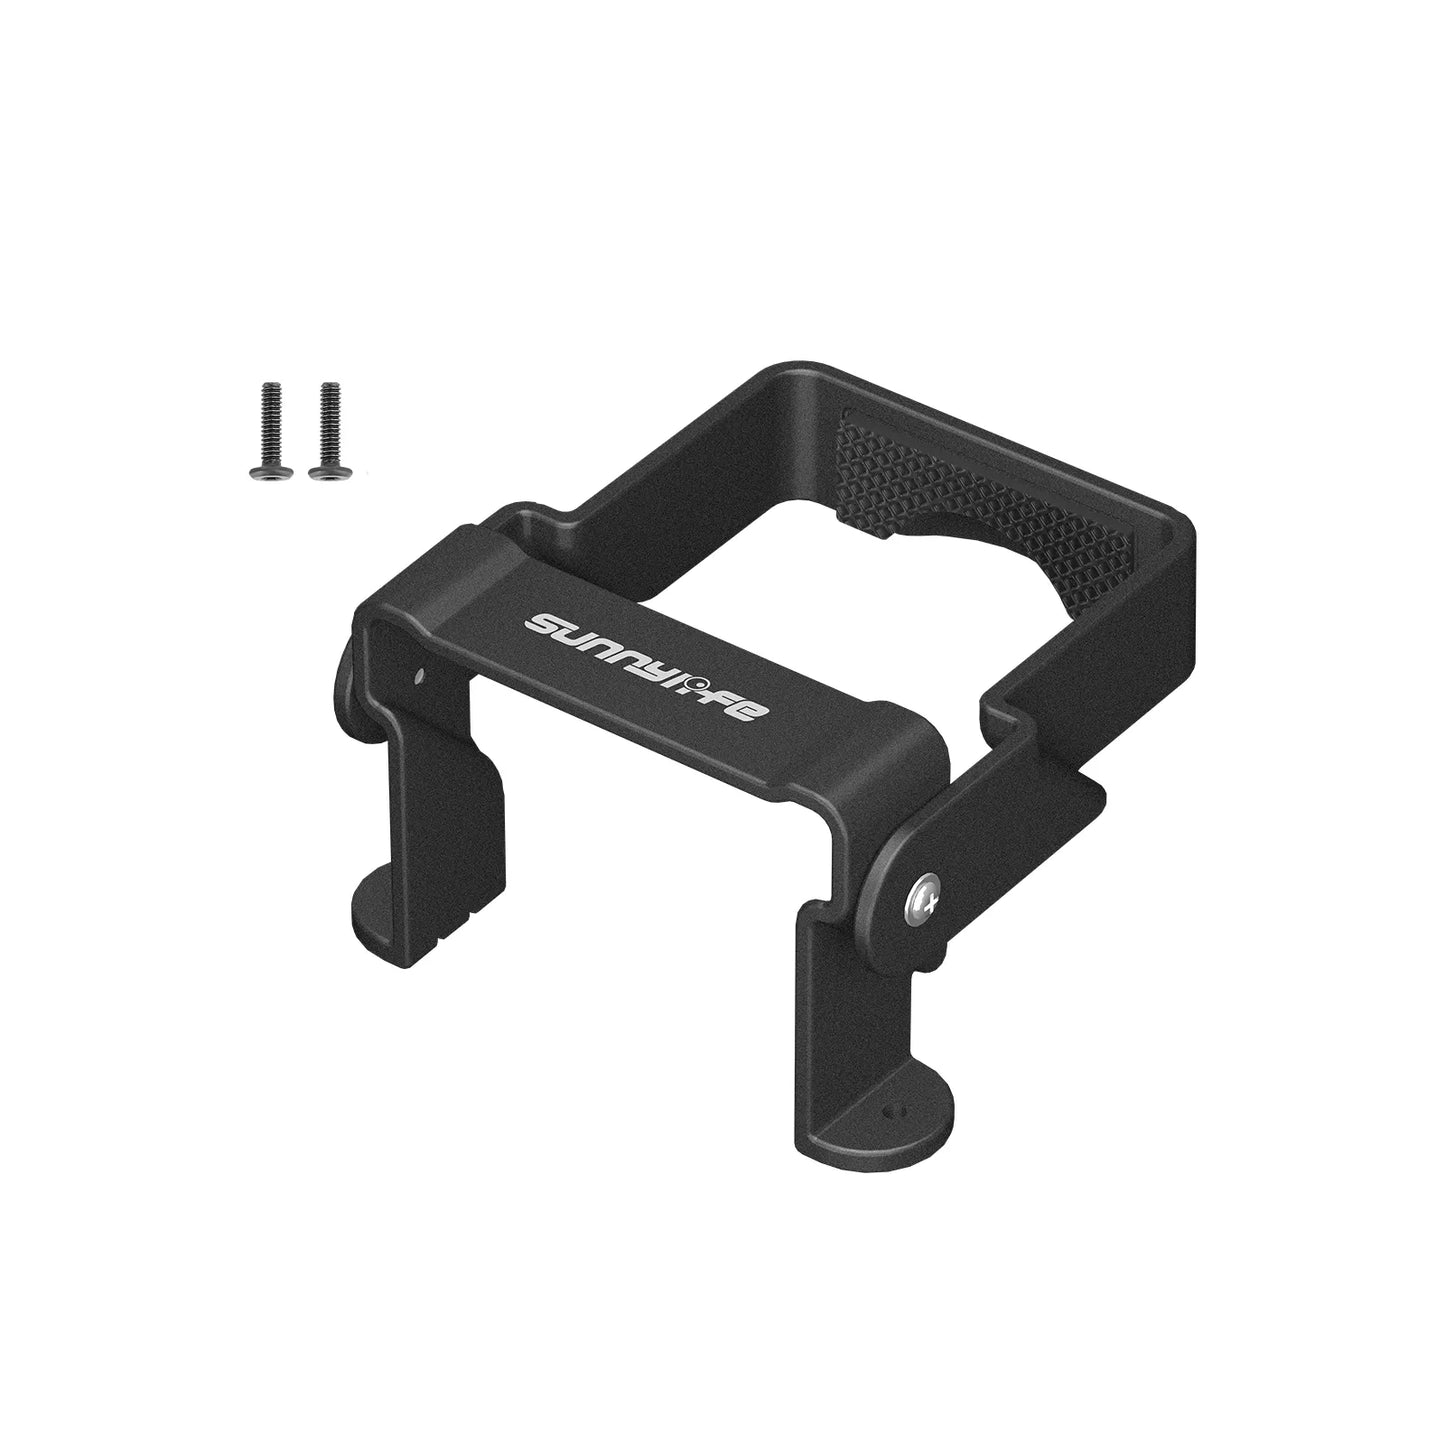 Battery Anti-release Buckle - Lock-up Anti-falling Foldable Battery Safety Lock Buckle Guard for DJI Avata Drone Accessories